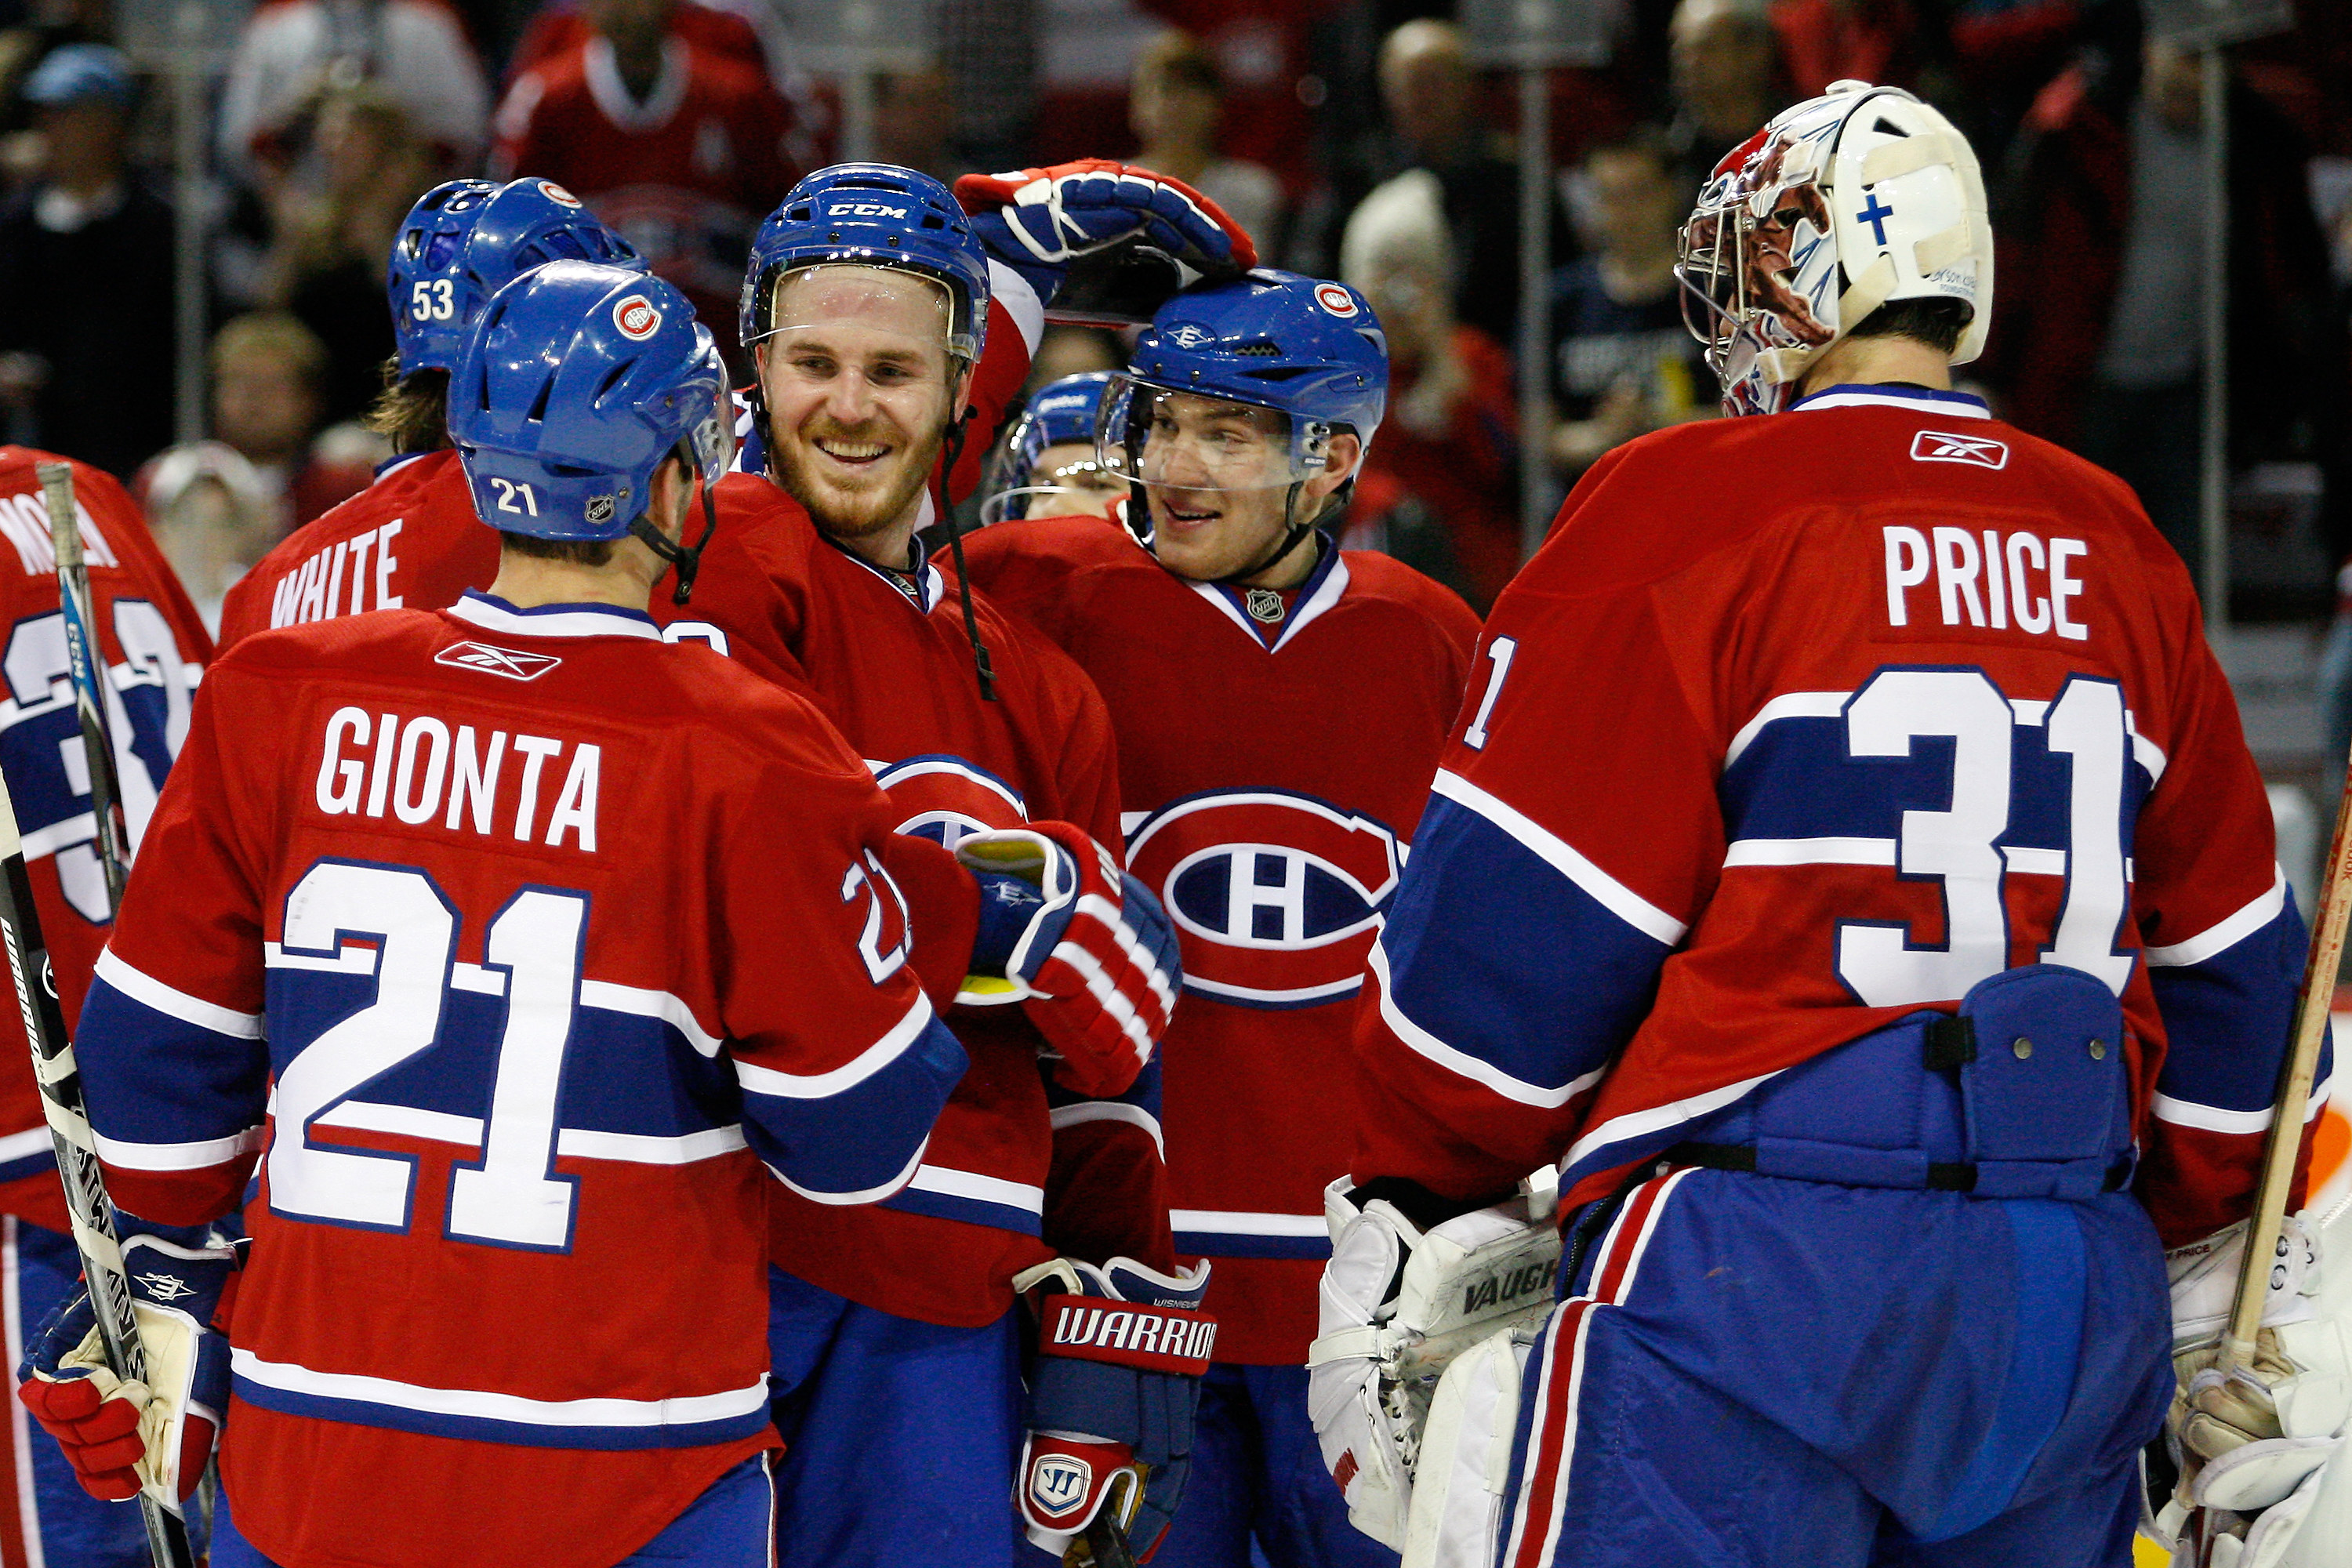 MONTREAL, CANADA - FEBRUARY 12:  Members of the Montreal Canadiens celebrate their 3-0 victory over the Toronto Maple Leafs during the NHL game at the Bell Centre on February 12, 2011 in Montreal, Quebec, Canada.  The Canadiens defeated the Maple Leafs 3-